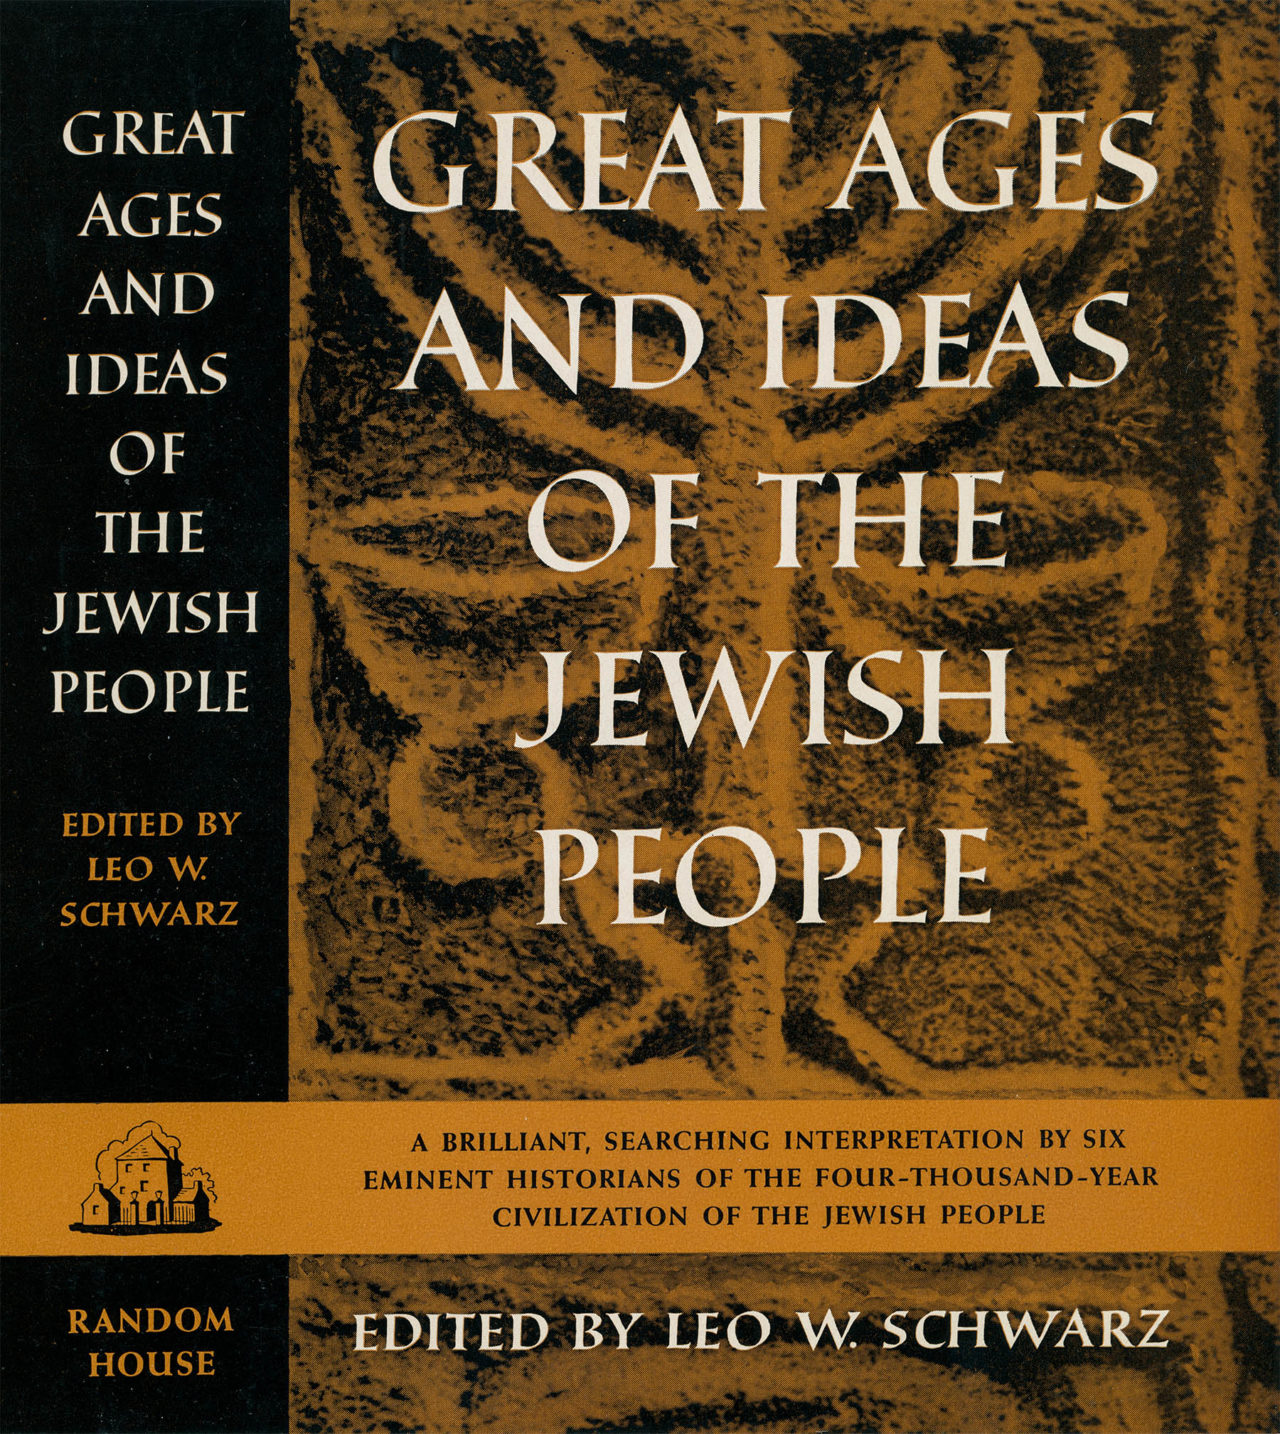 Book jacket of Great Ages and Ideas of the Jewish People